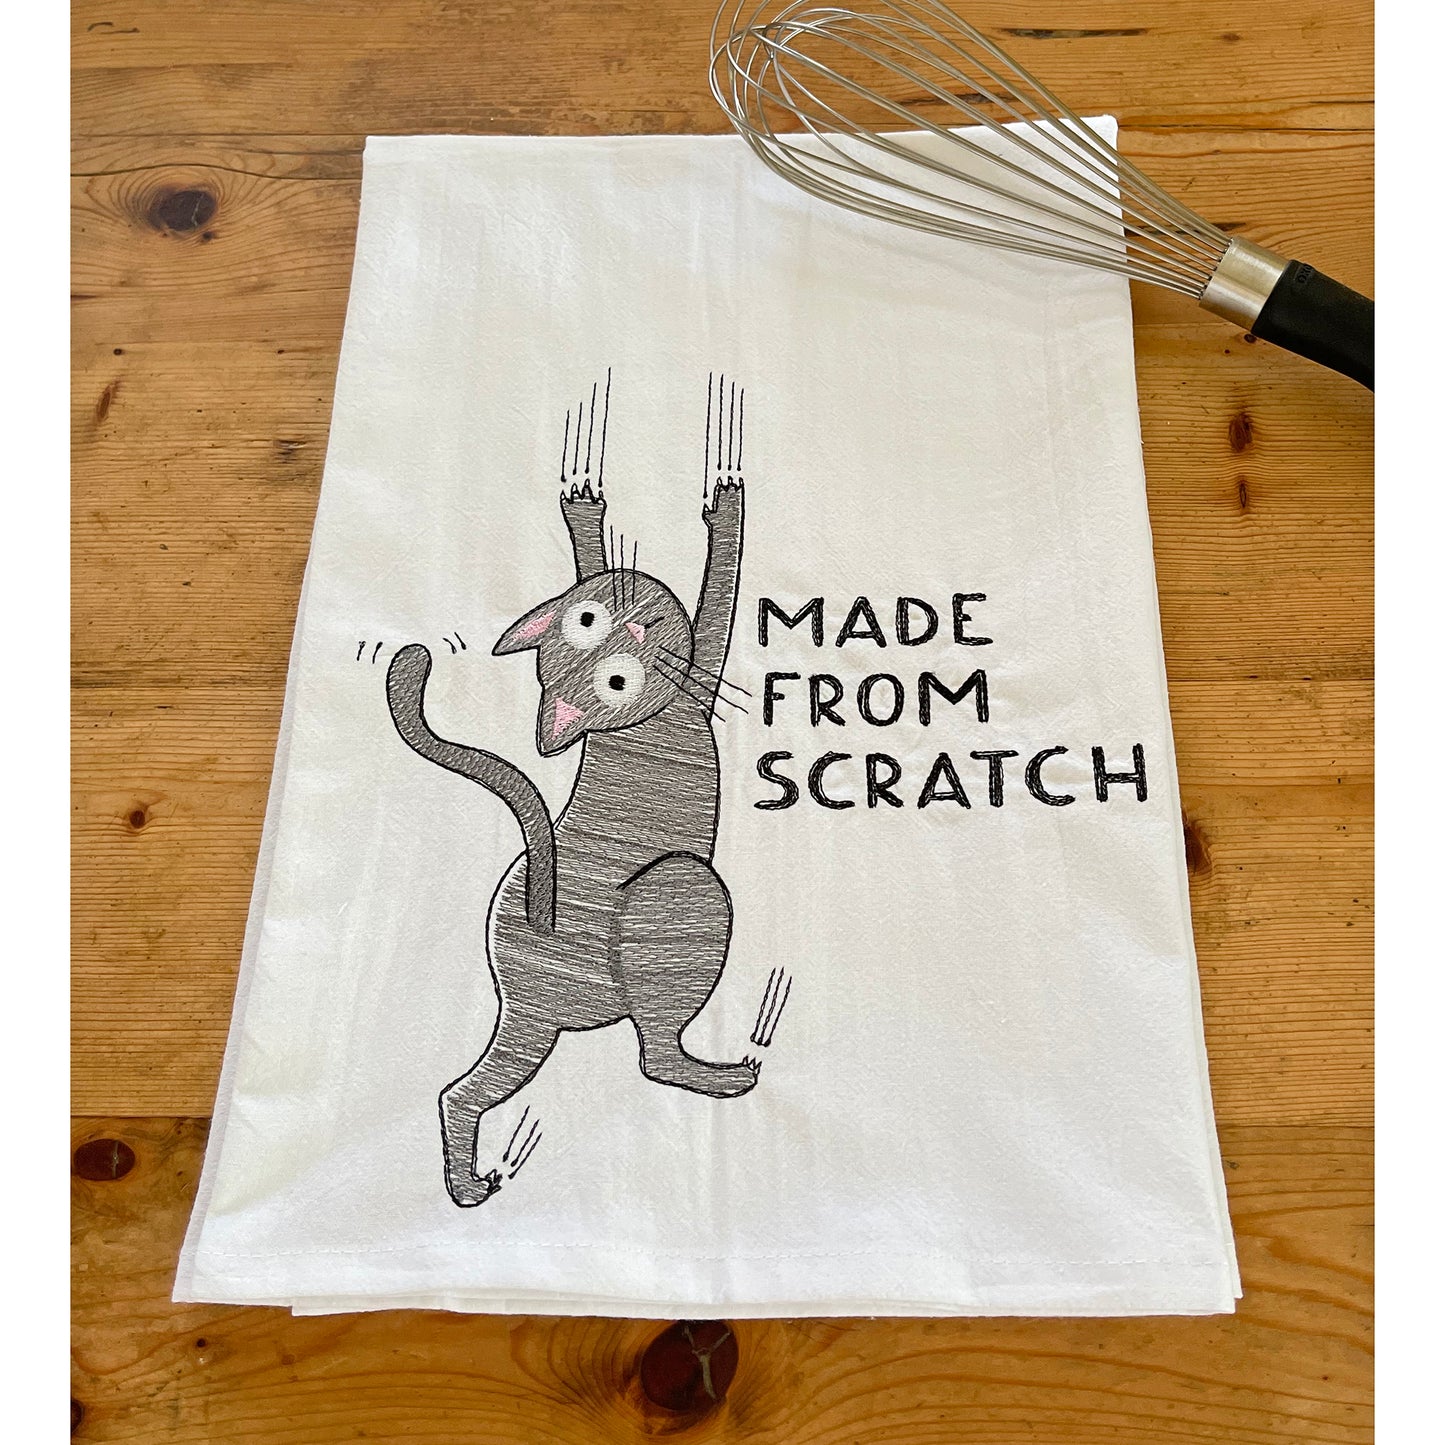 Made From Scratch - Embroidered Flour Sack Kitchen Towel